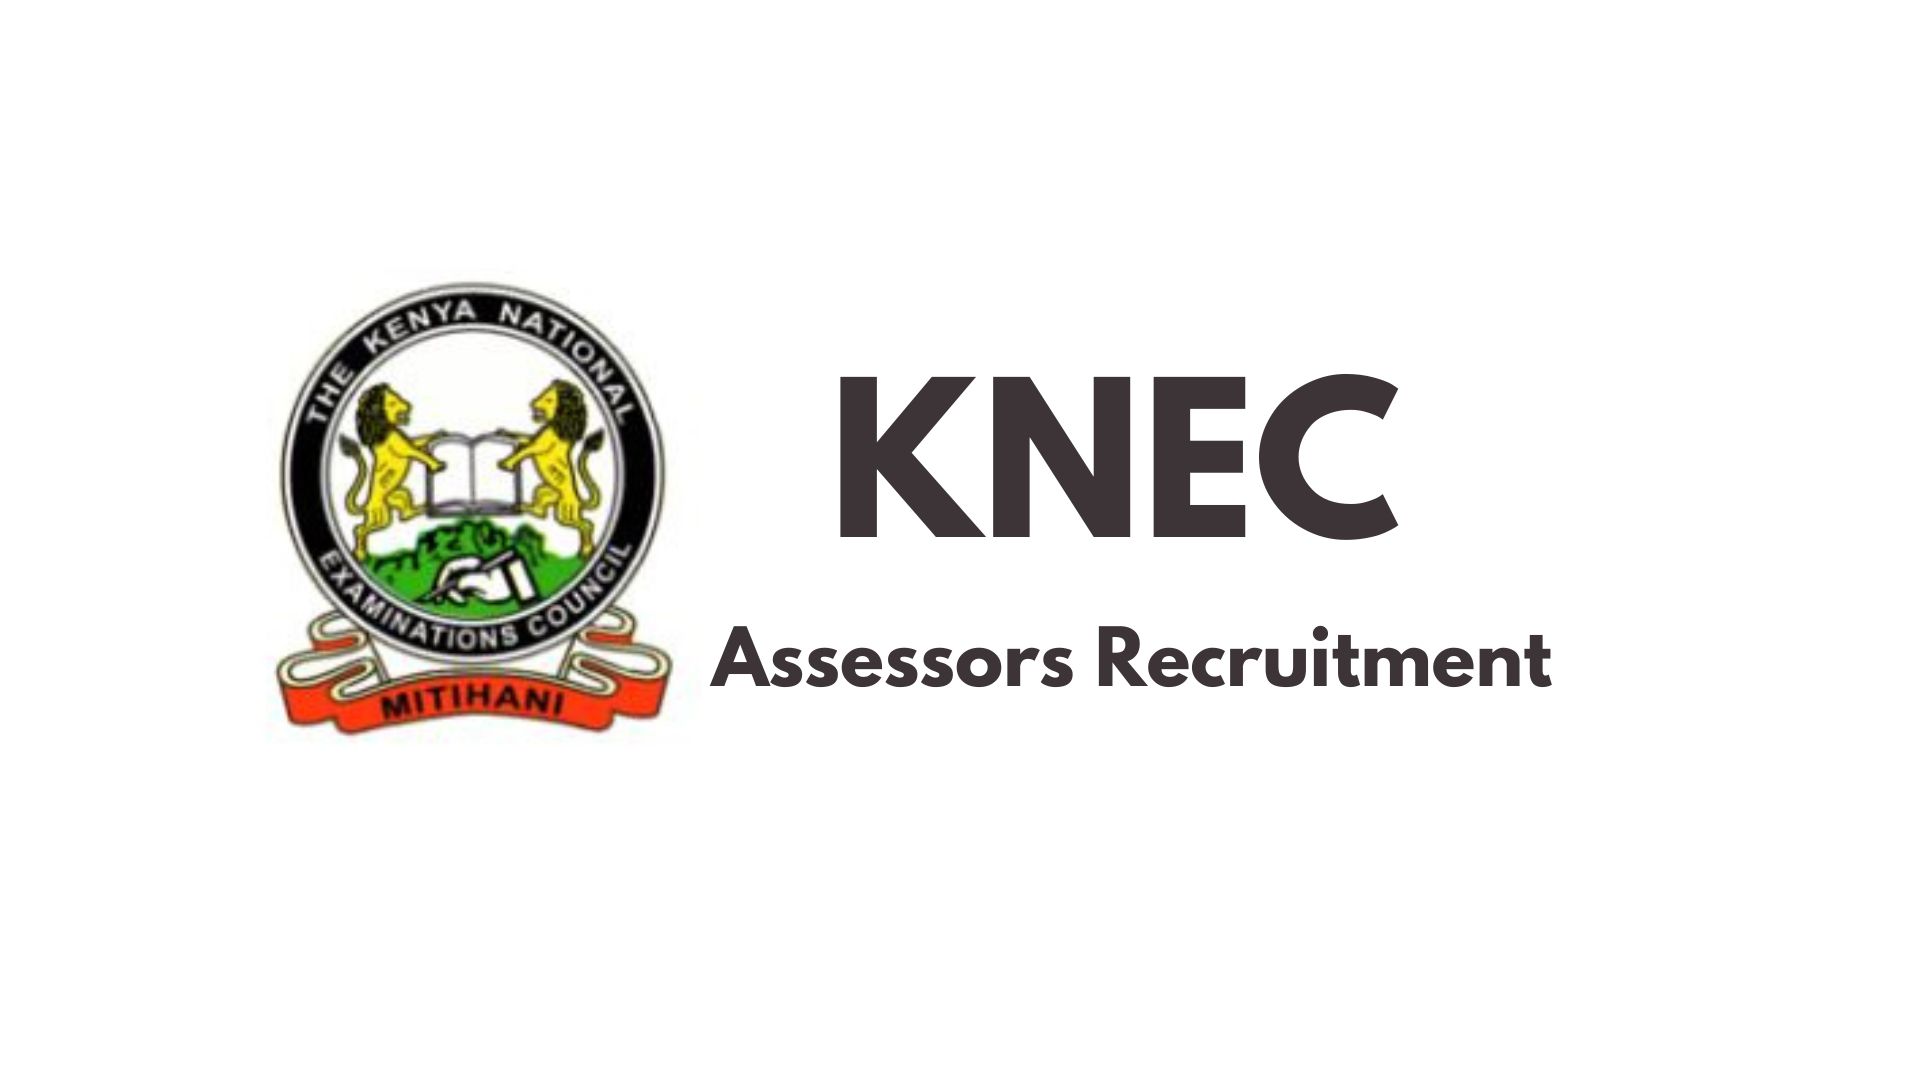 KNEC opens application for recruitment of KCSE assessors